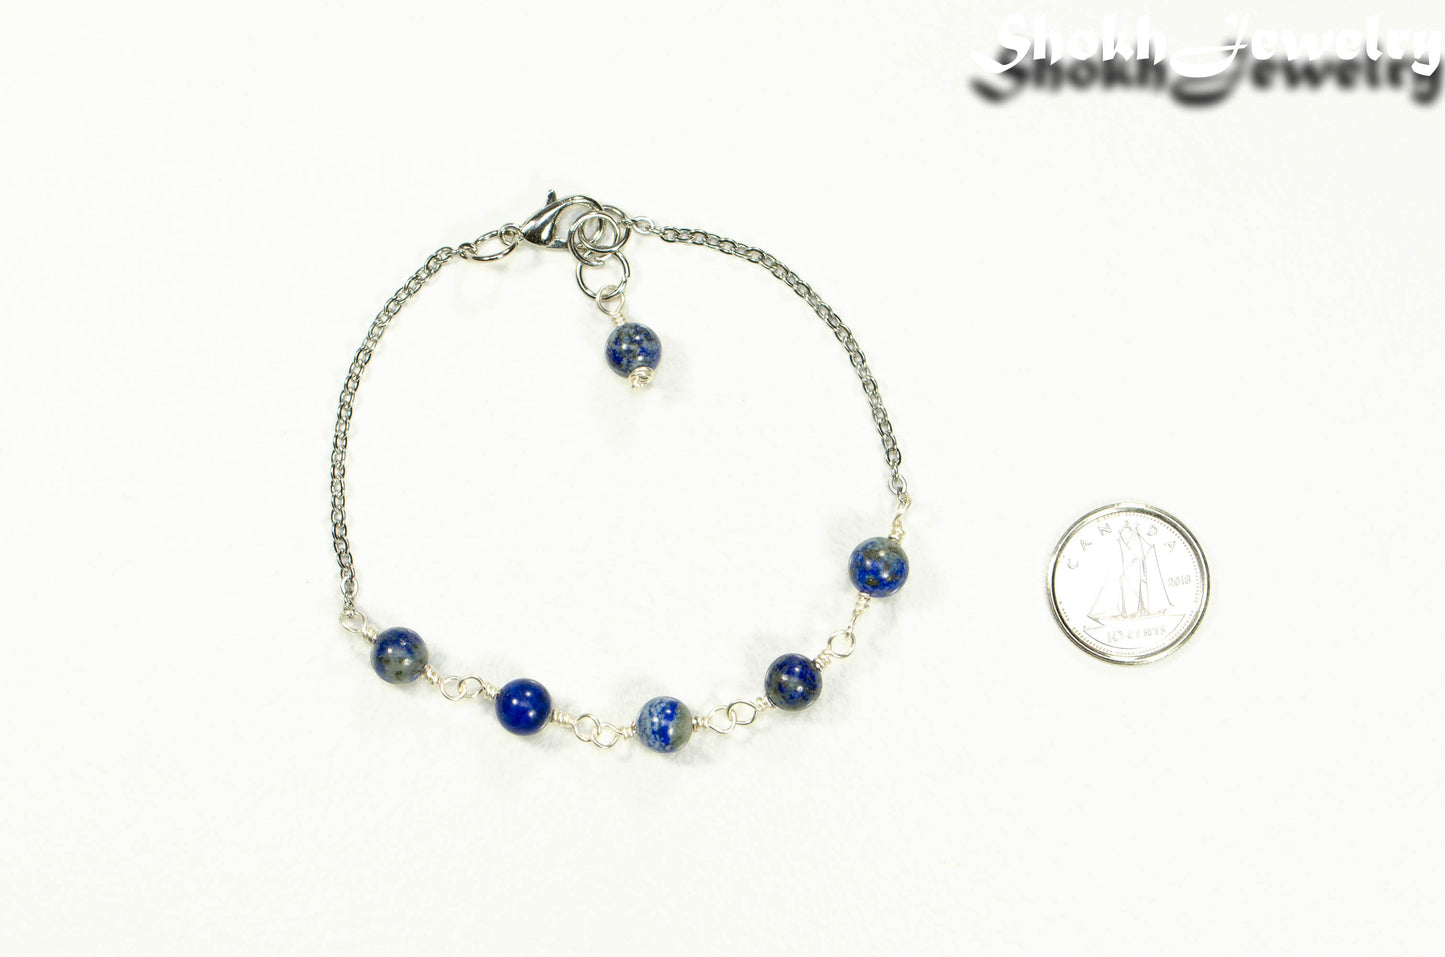 Lapis Lazuli and Stainless Steel Chain Anklet beside a dime.